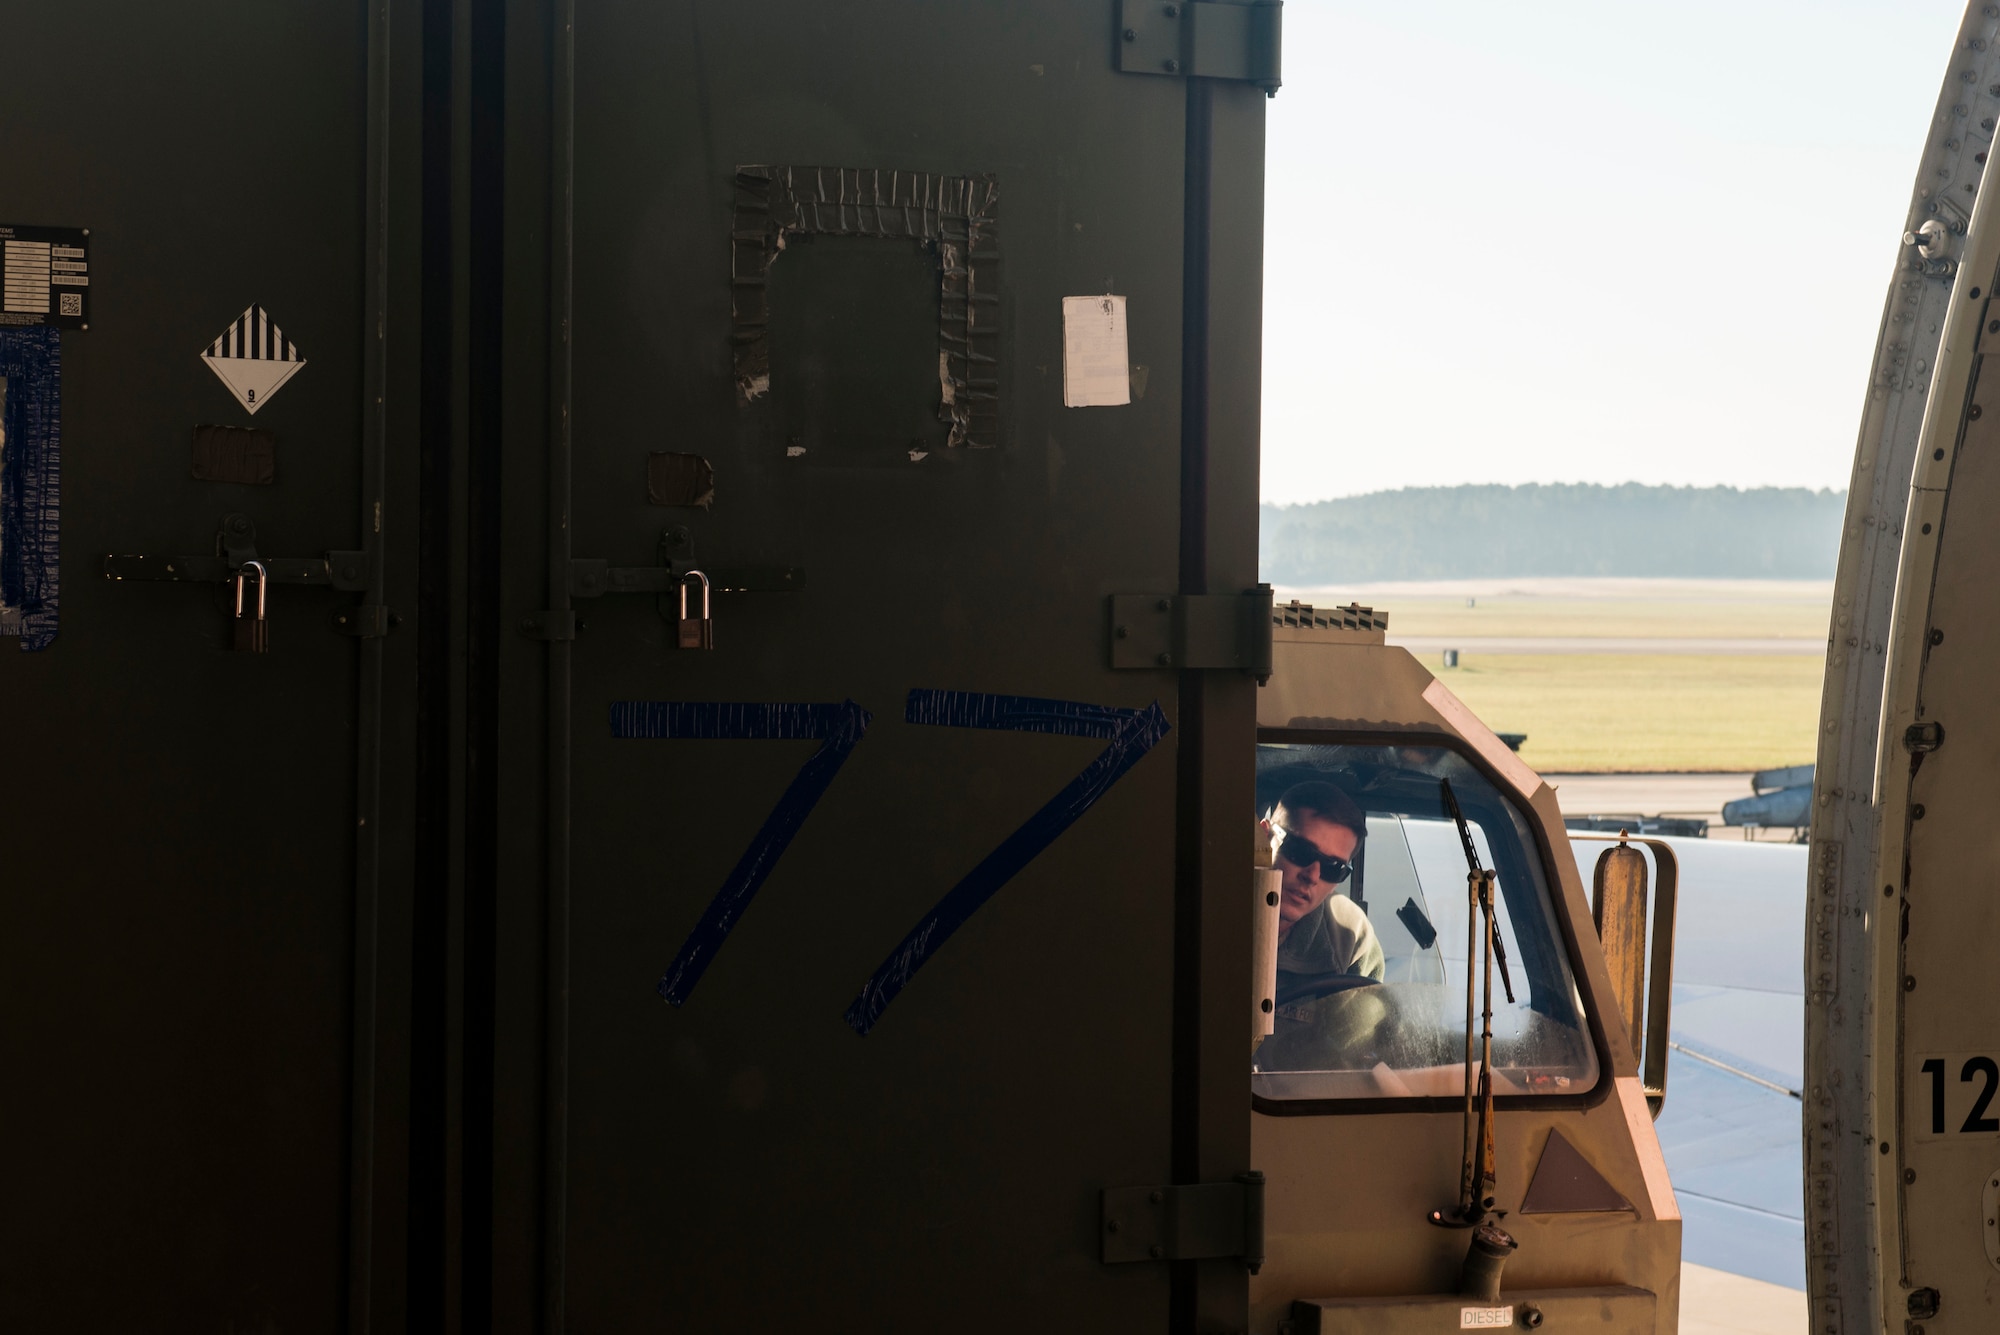 U.S. Air Force Tech. Sgt. Stephen Lacey, 20th Logistics Readiness Squadron air transportation specialist, loads cargo onto a Boeing 747 while operating a k-loader at Shaw Air Force Base, South Carolina, Nov. 1, 2017.